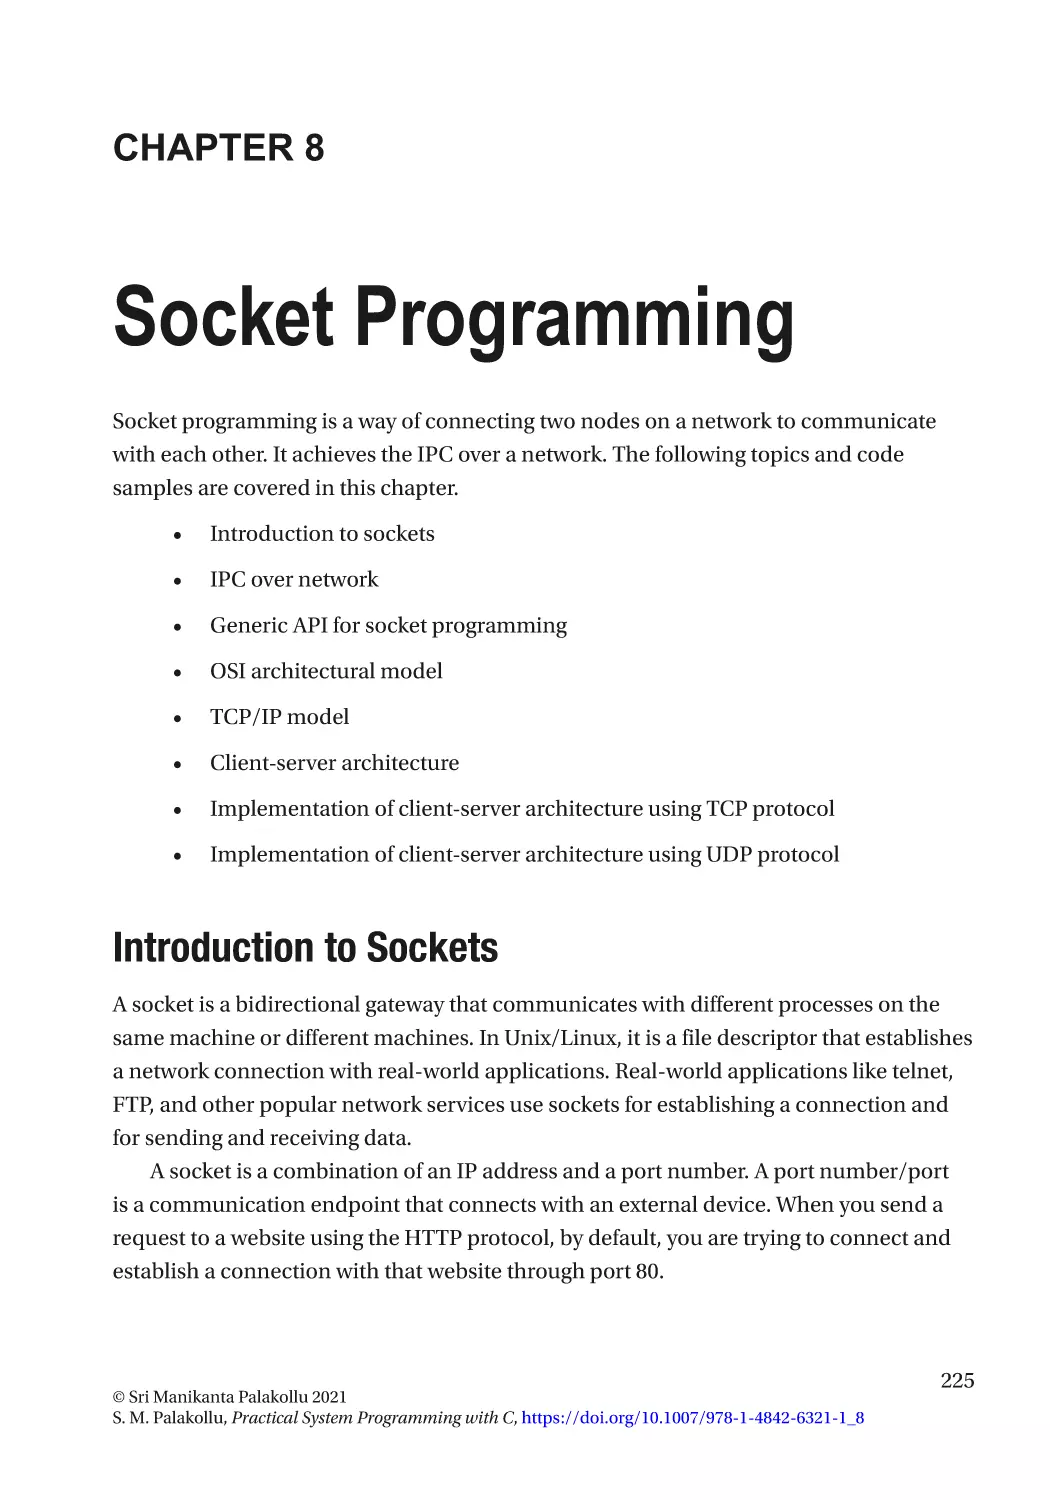 Chapter 8
Introduction to Sockets